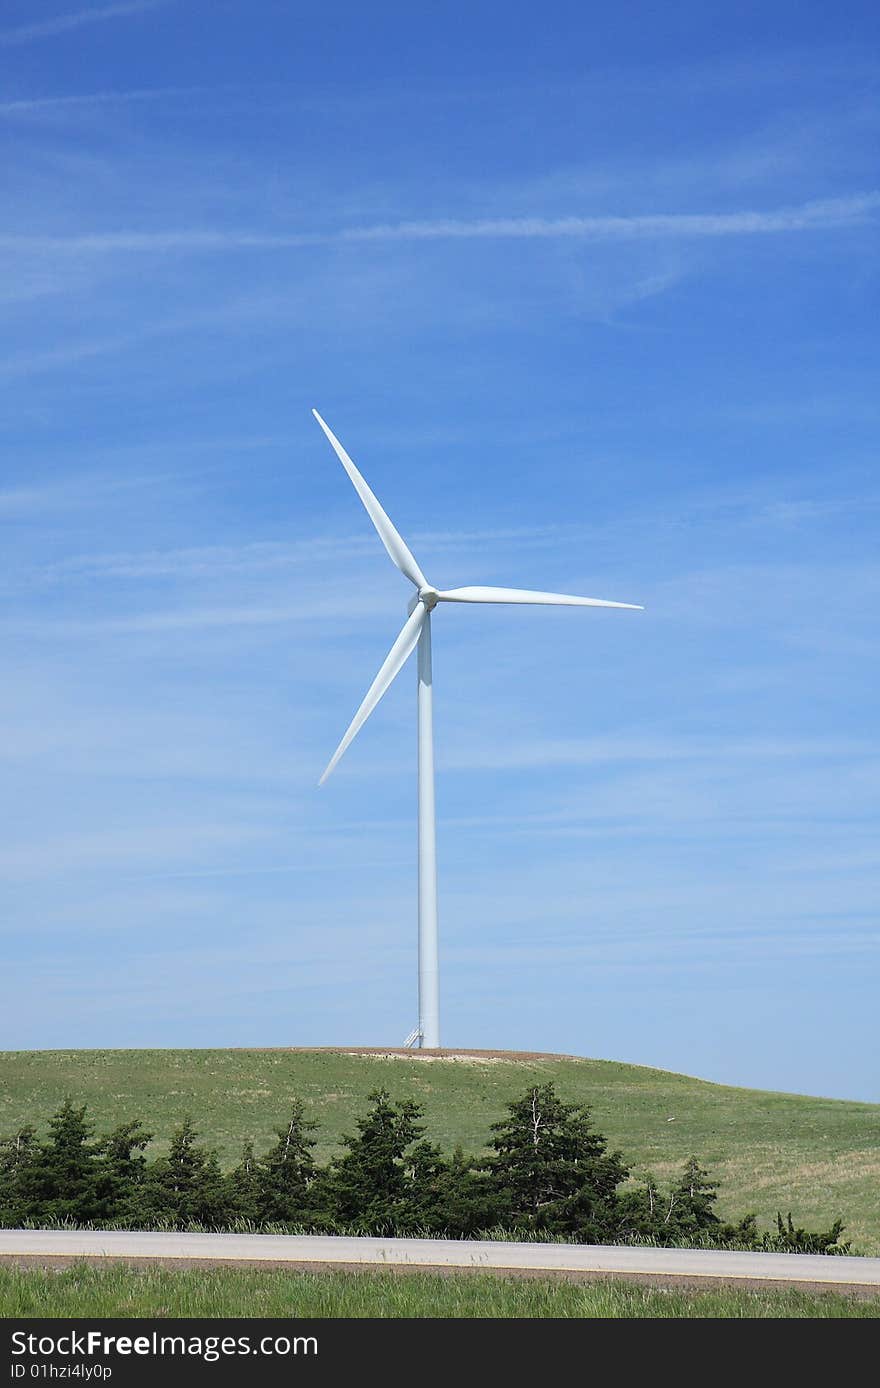 View of the wind power